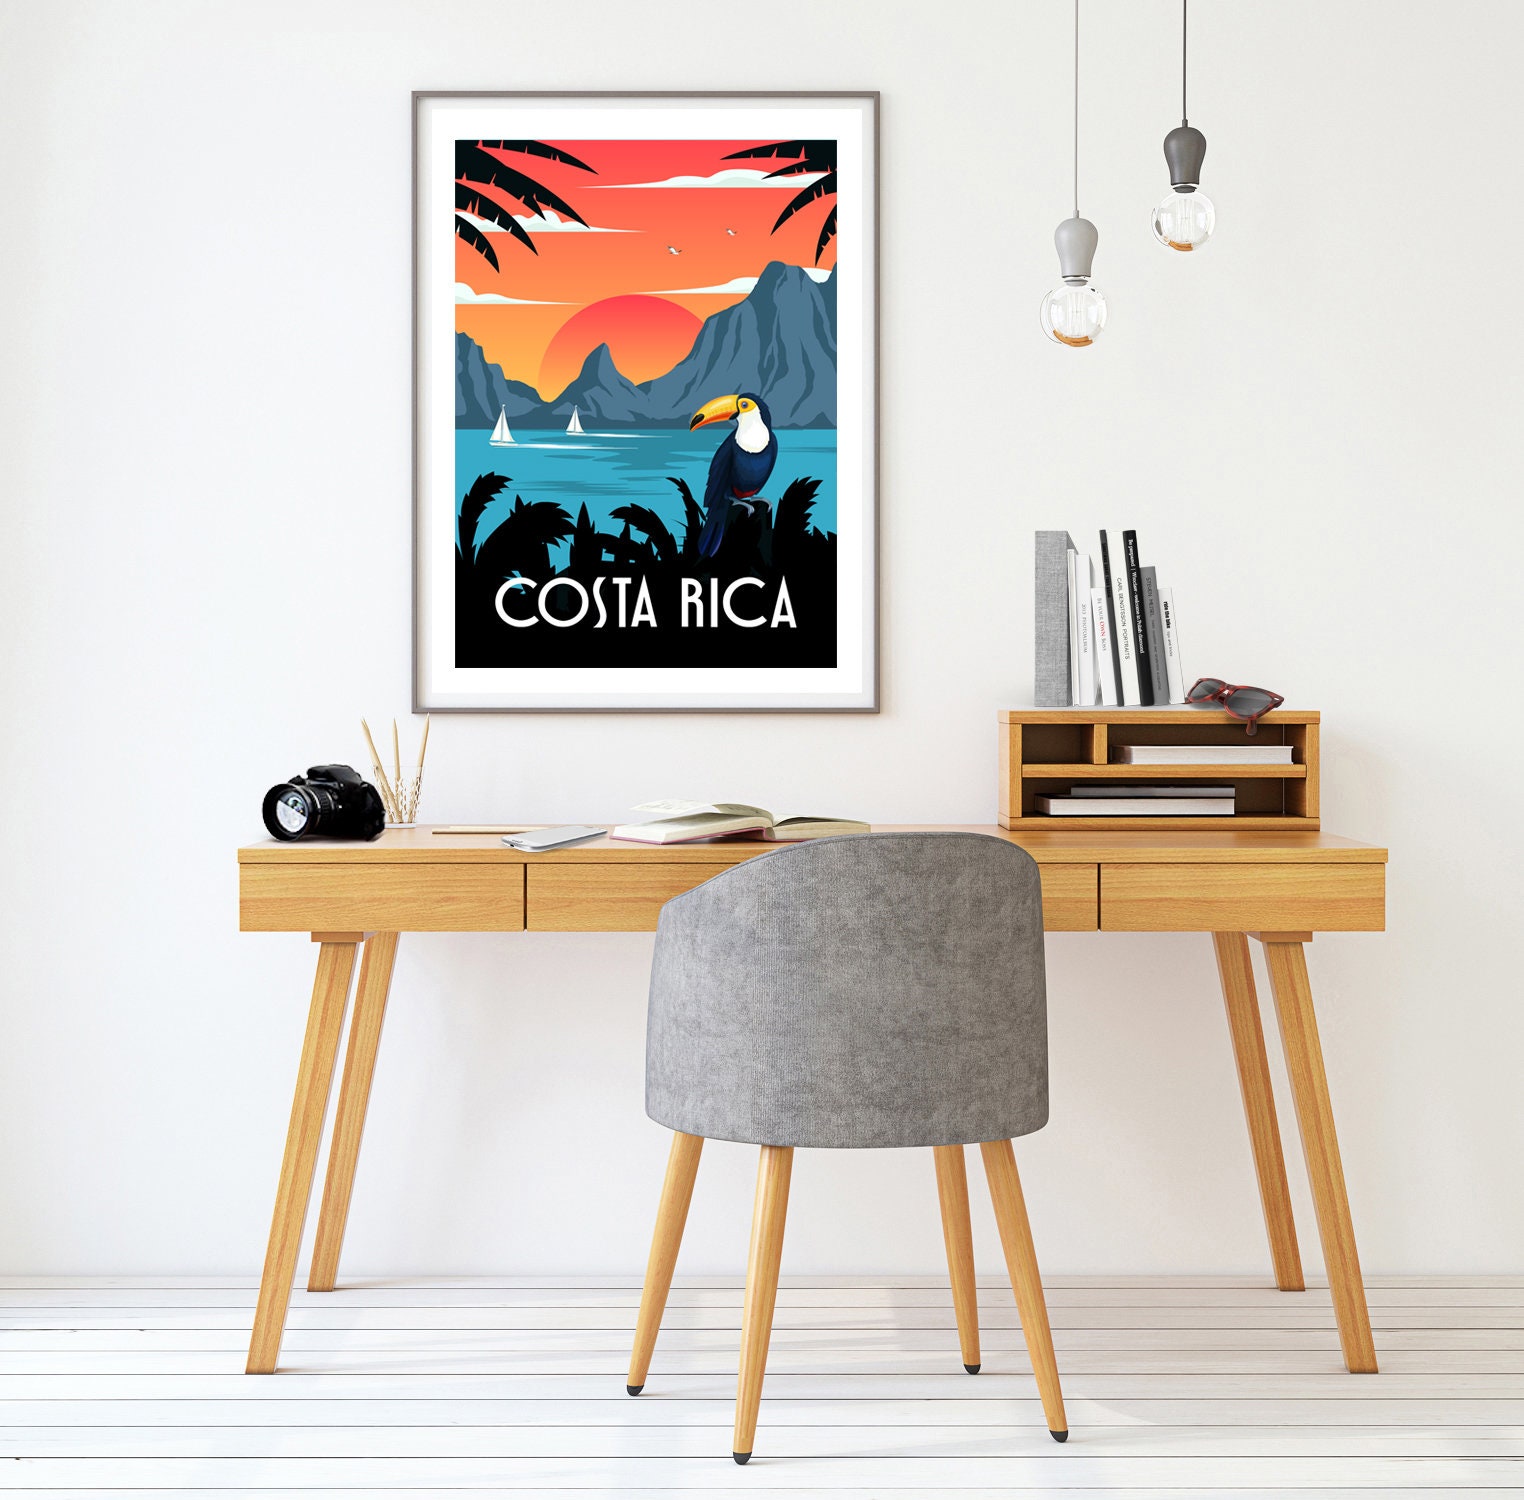 Costa Rica Poster, Costa Rica Print, Travel Wall Art, Travel Poster, Retro Wall  Art, Tropical Wall Art, South American Wall Art - Etsy